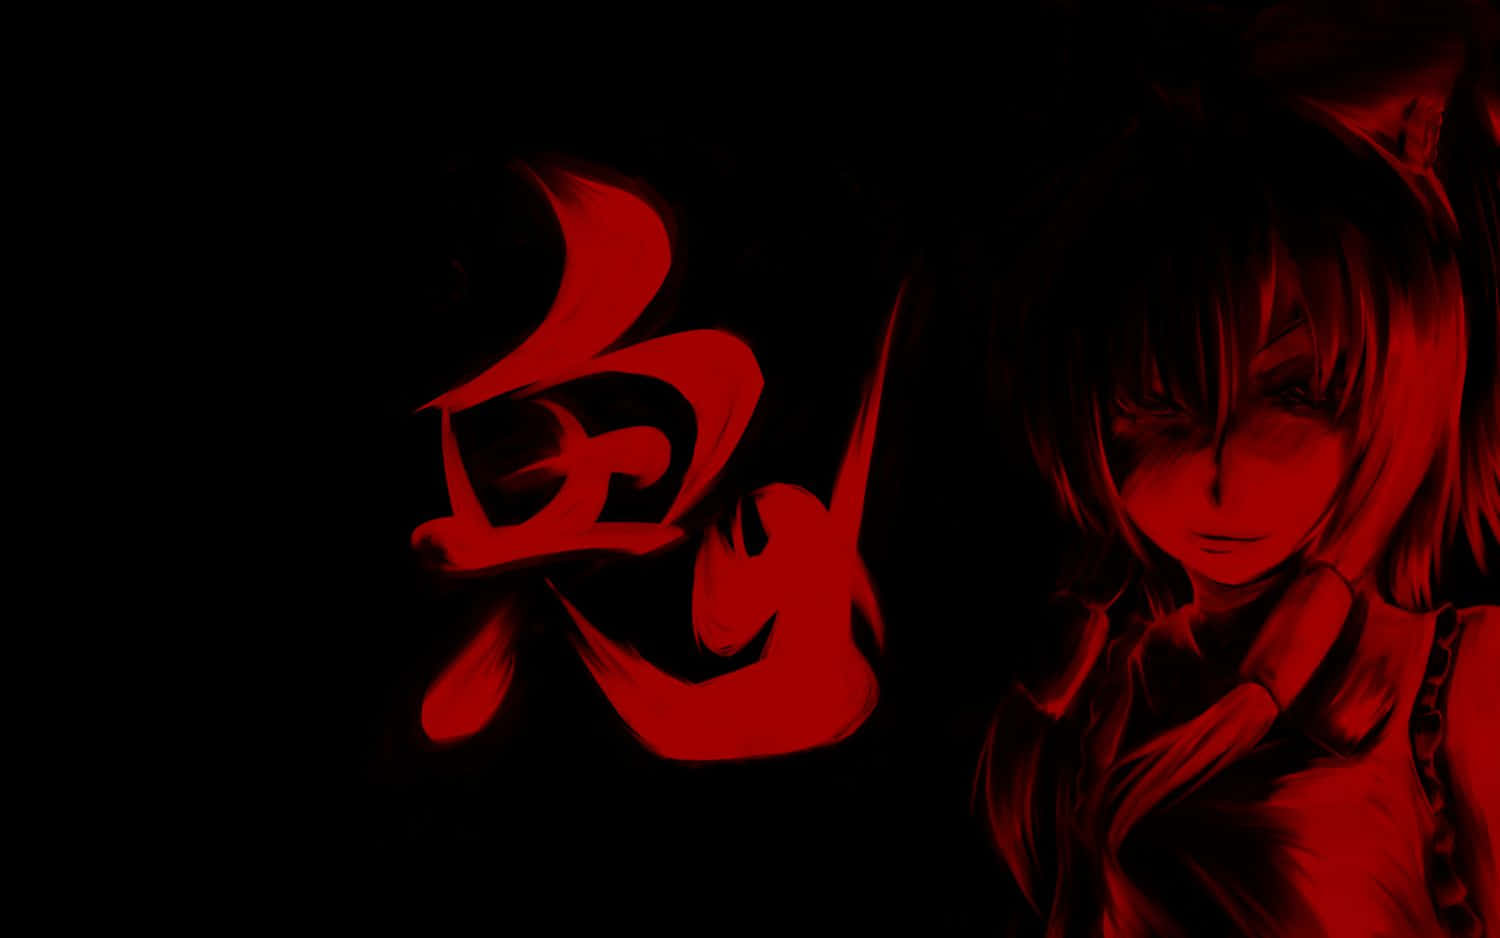 Mysterious black-and-red anime scene Wallpaper